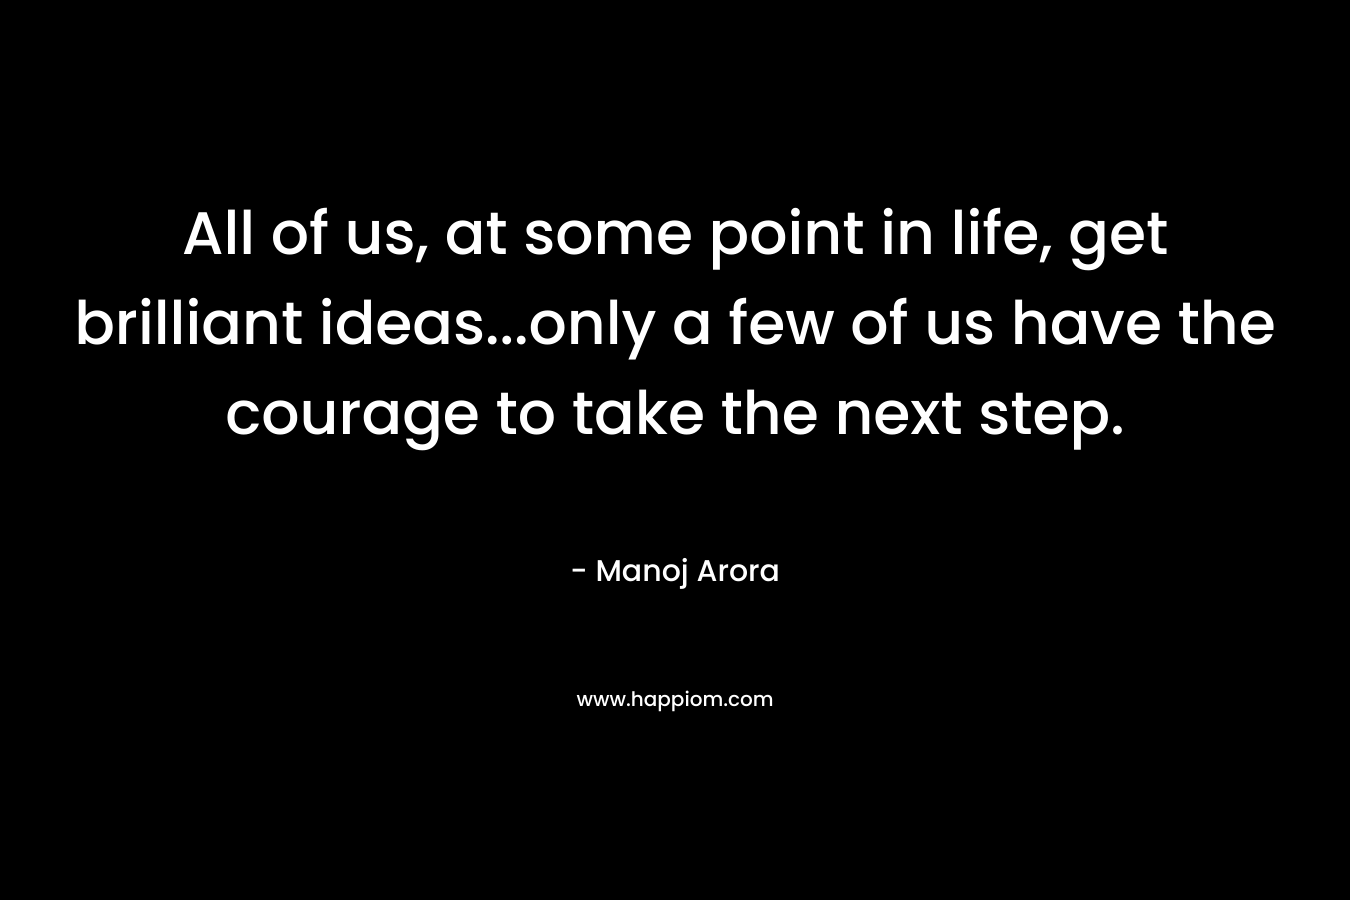 All of us, at some point in life, get brilliant ideas...only a few of us have the courage to take the next step.